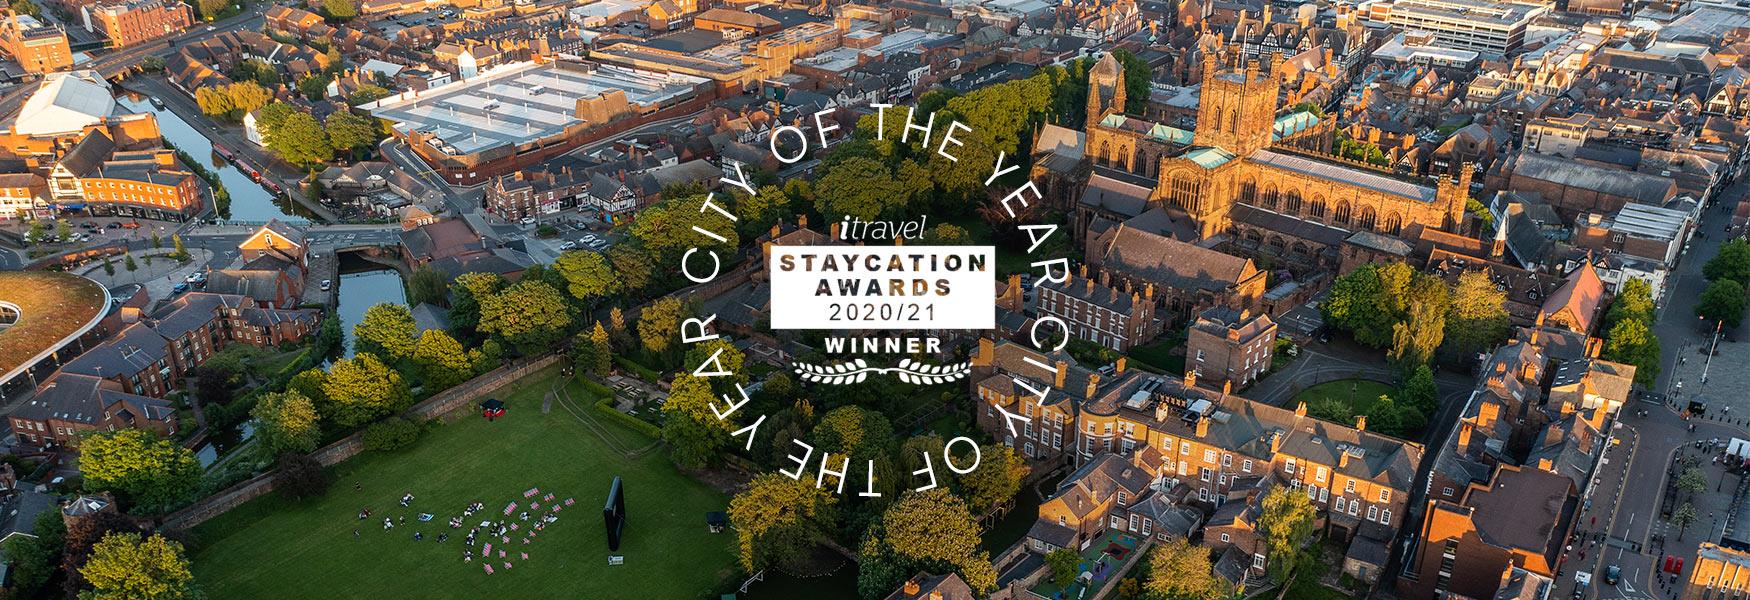 Chester: The Staycation Awards’ City of the Year | Chester travel guide: what to do and where to stay on a break to the award-winning city.